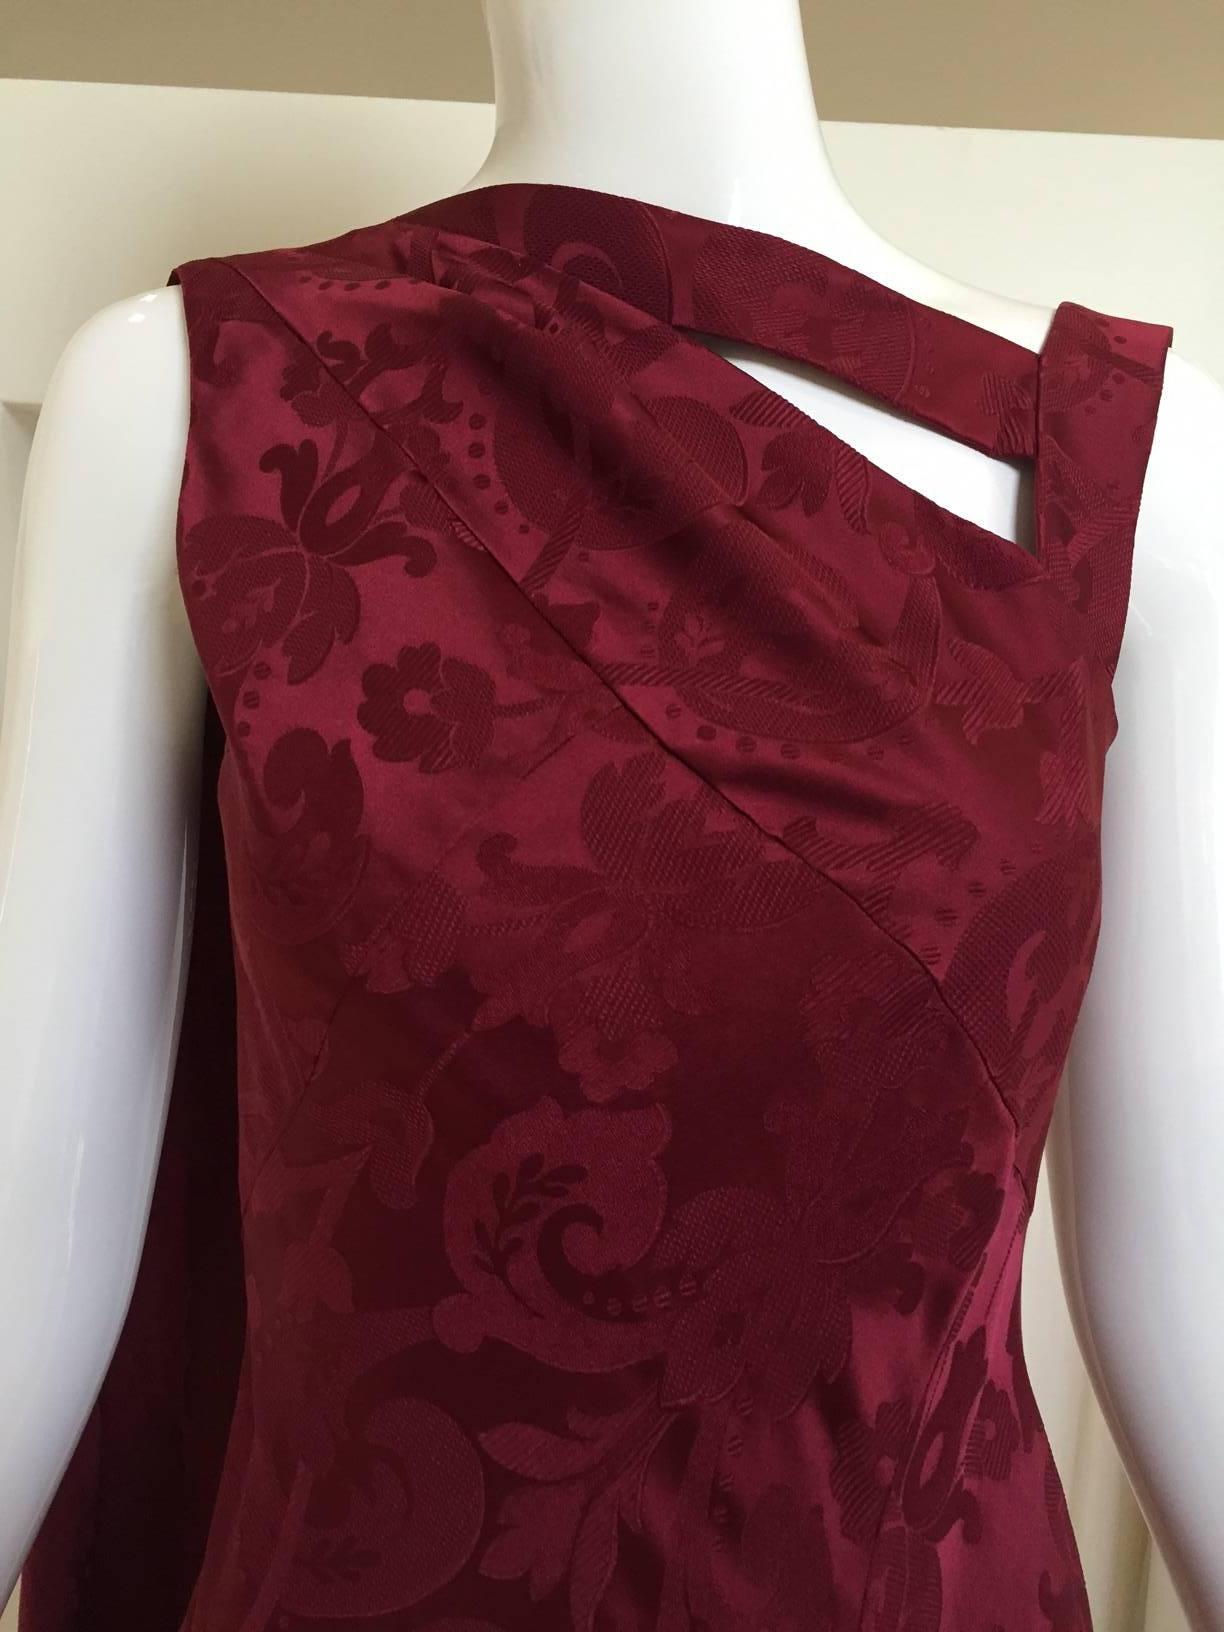 90s Vintage Christian Dior by John Galliano maroon silk jacquard gown with long sash draped at the back. slit in the front.
marked size 6 but fit smaller. Perfect for size 2/4 
SMALL